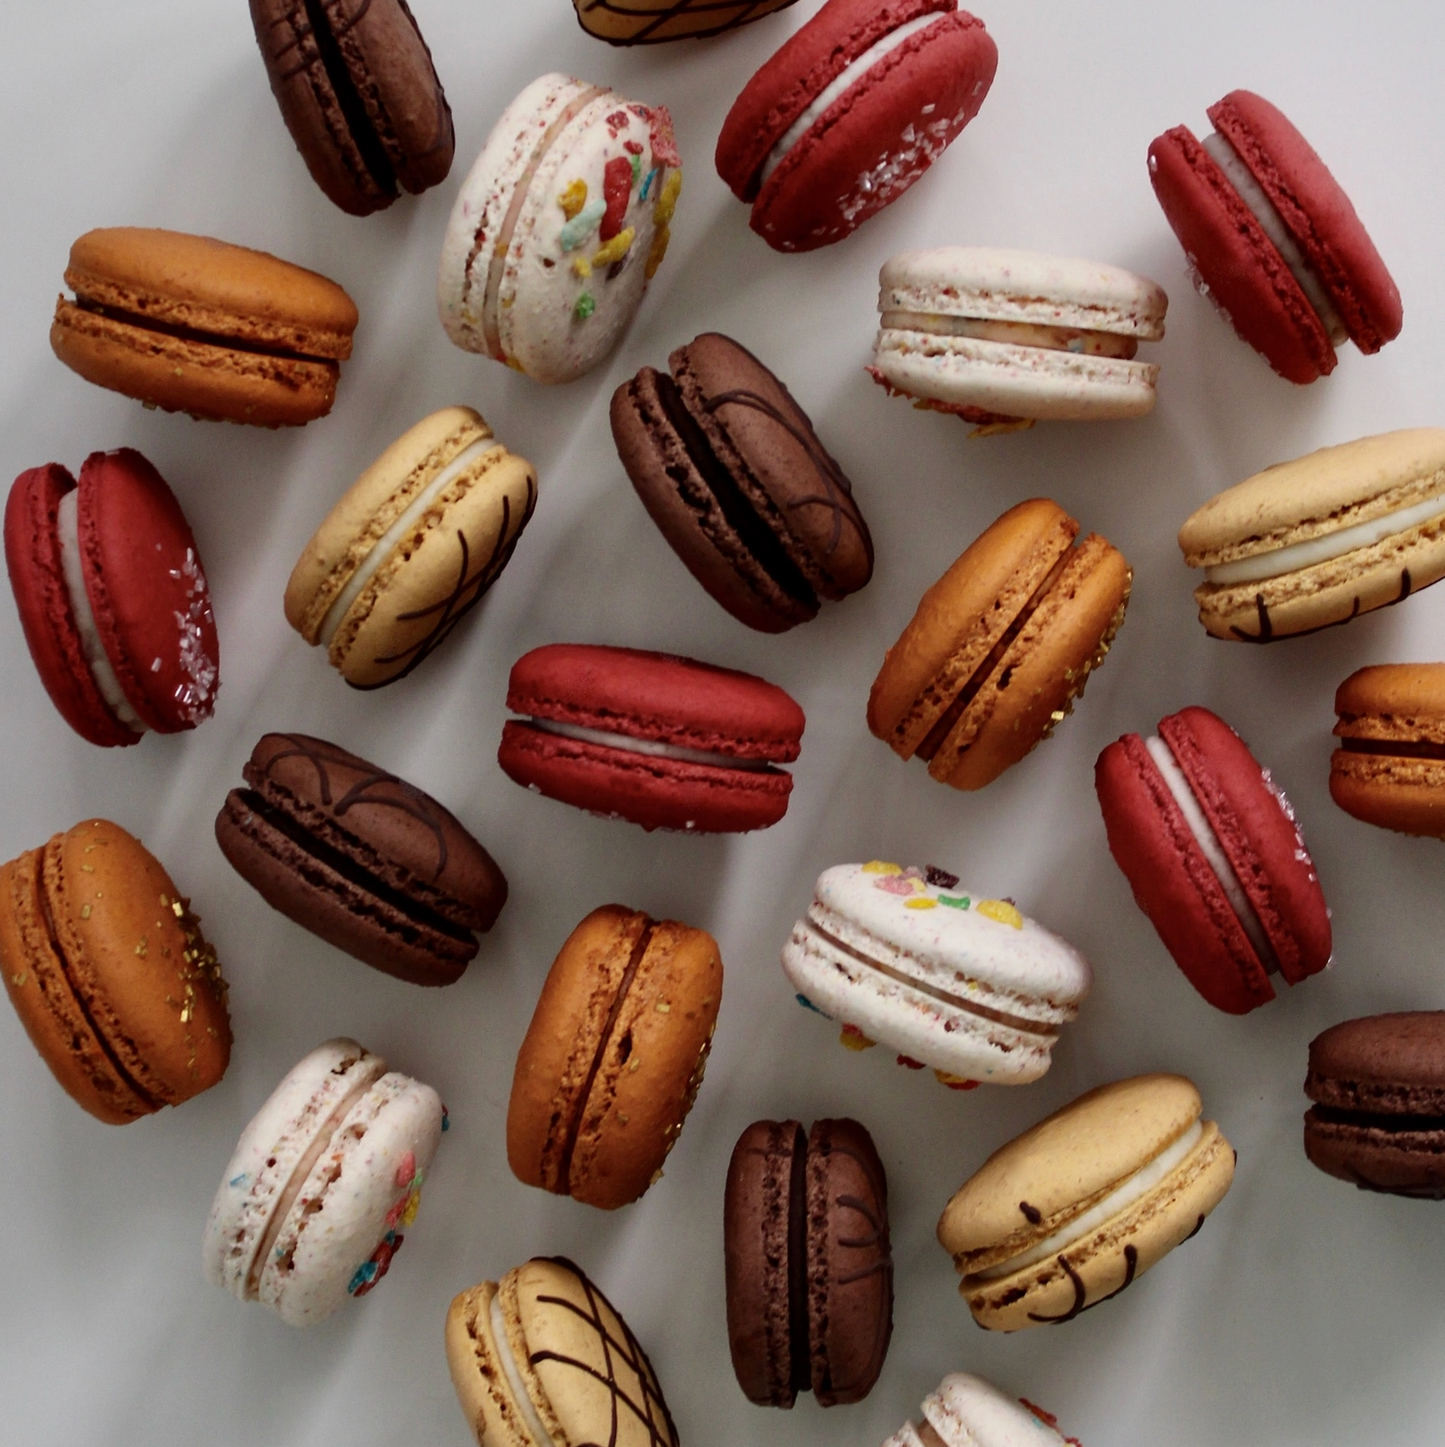 Savor Patisserie French Boxed Macarons